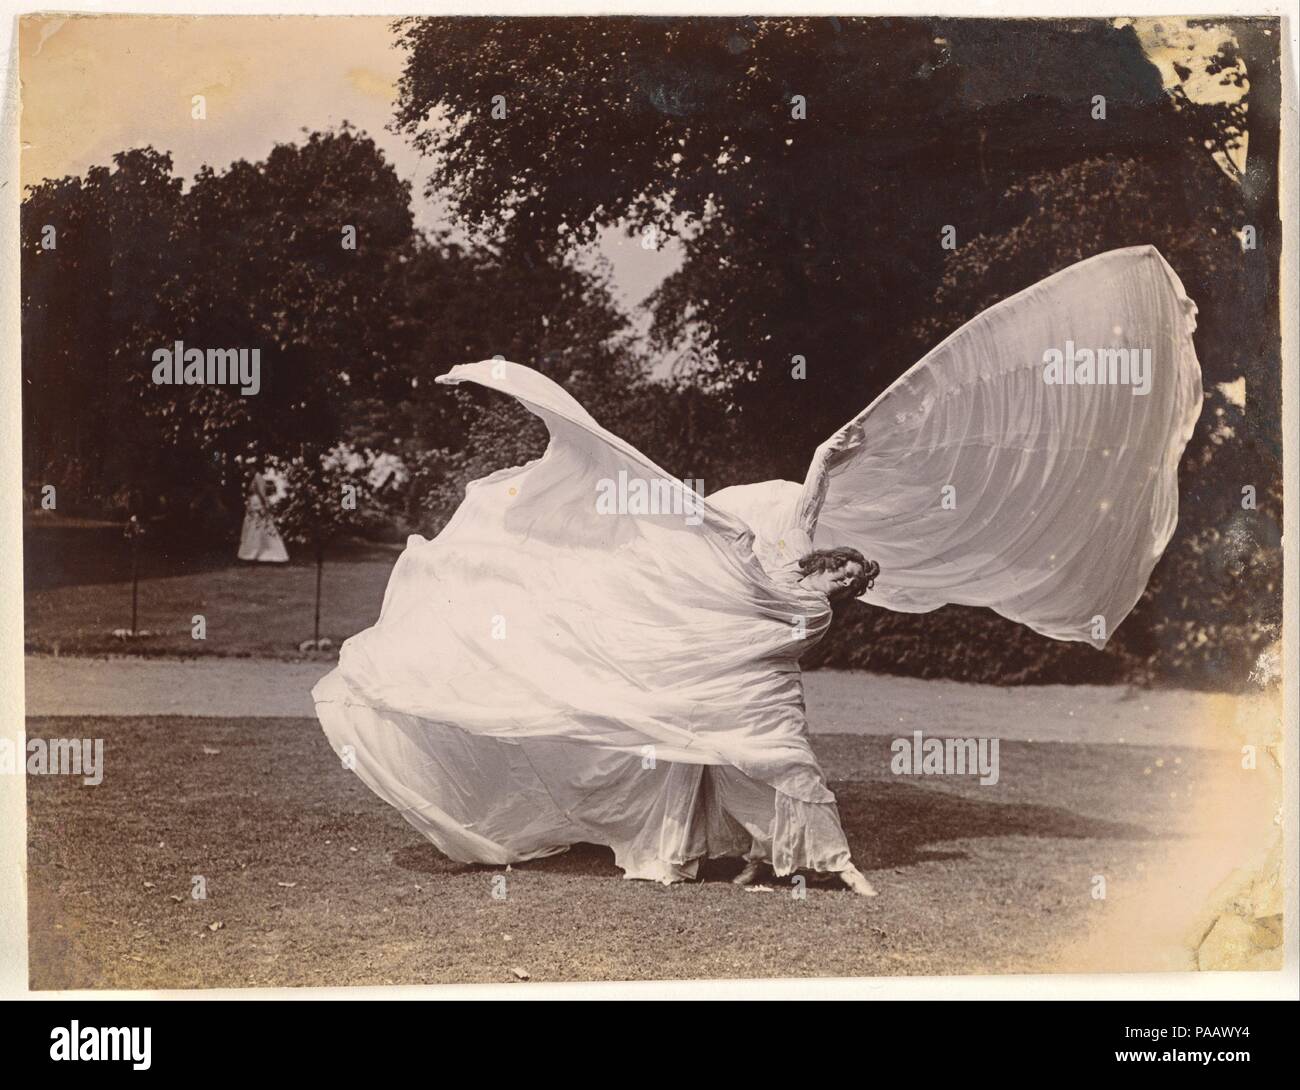 [Loie Fuller Dancing]. Artist: Samuel Joshua Beckett (British, Shadwell, Stepney [London] 1870-1940 Bournemouth). Dimensions: 10.3 x 13.3 cm (4 x 5 1/4 in.), irregularly trimmed. Date: ca. 1900.  The American dancer Loie Fuller (1862-1928) conquered Paris on her opening night at the Folies-Bergère on November 5, 1892. Manipulating with bamboo sticks an immense skirt made of over a hundred yards of translucent, iridescent silk, the dancer evoked organic forms --butterflies, flowers, and flames--in perpetual metamorphosis through a play of colored lights. Loie Fuller's innovative lighting effect Stock Photo